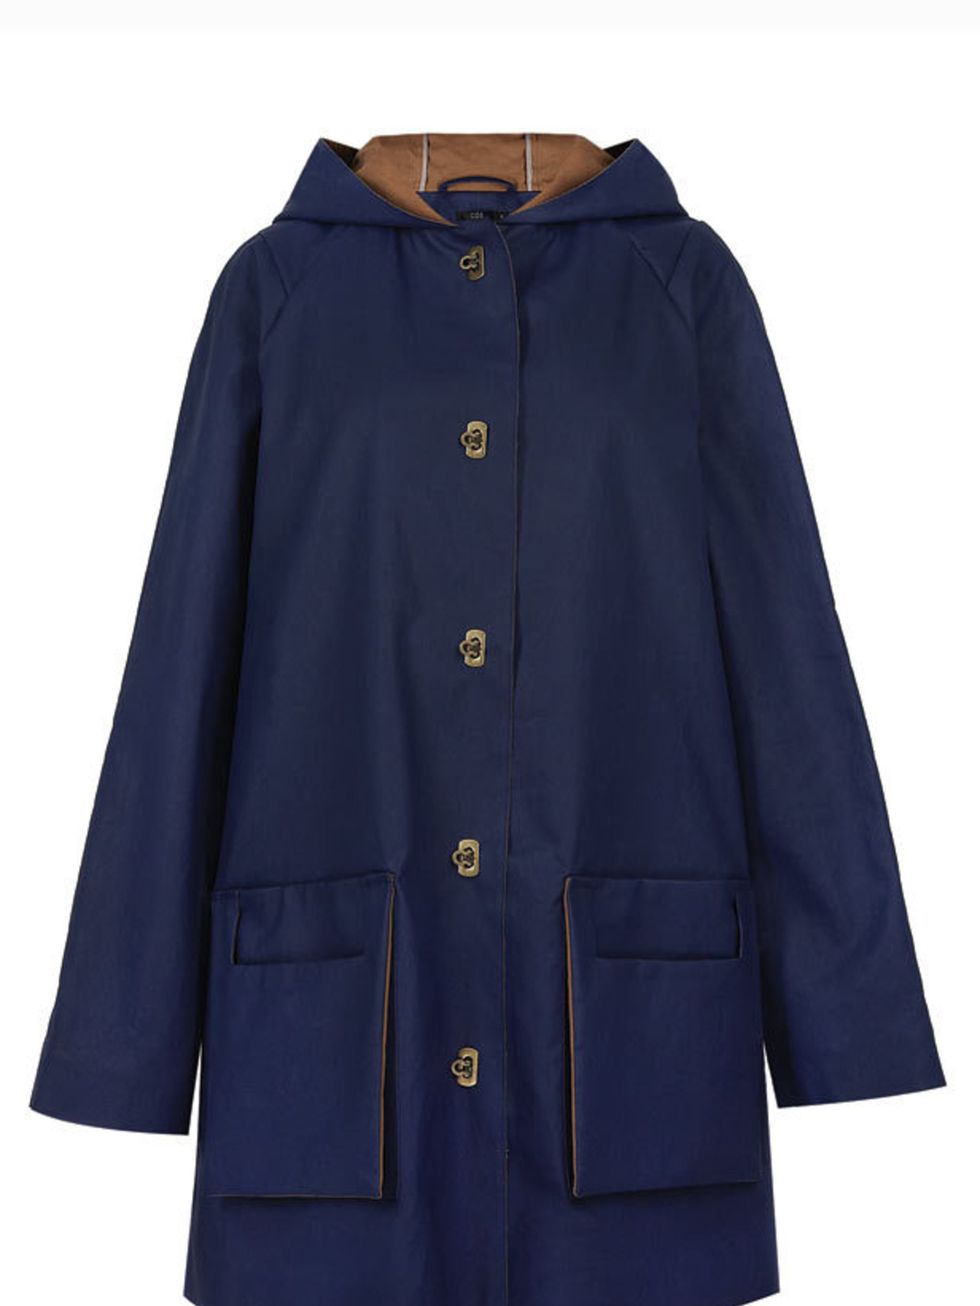 <p>Cos coated-cotton jacket, £129, for stockists call 0207 478 0400</p>